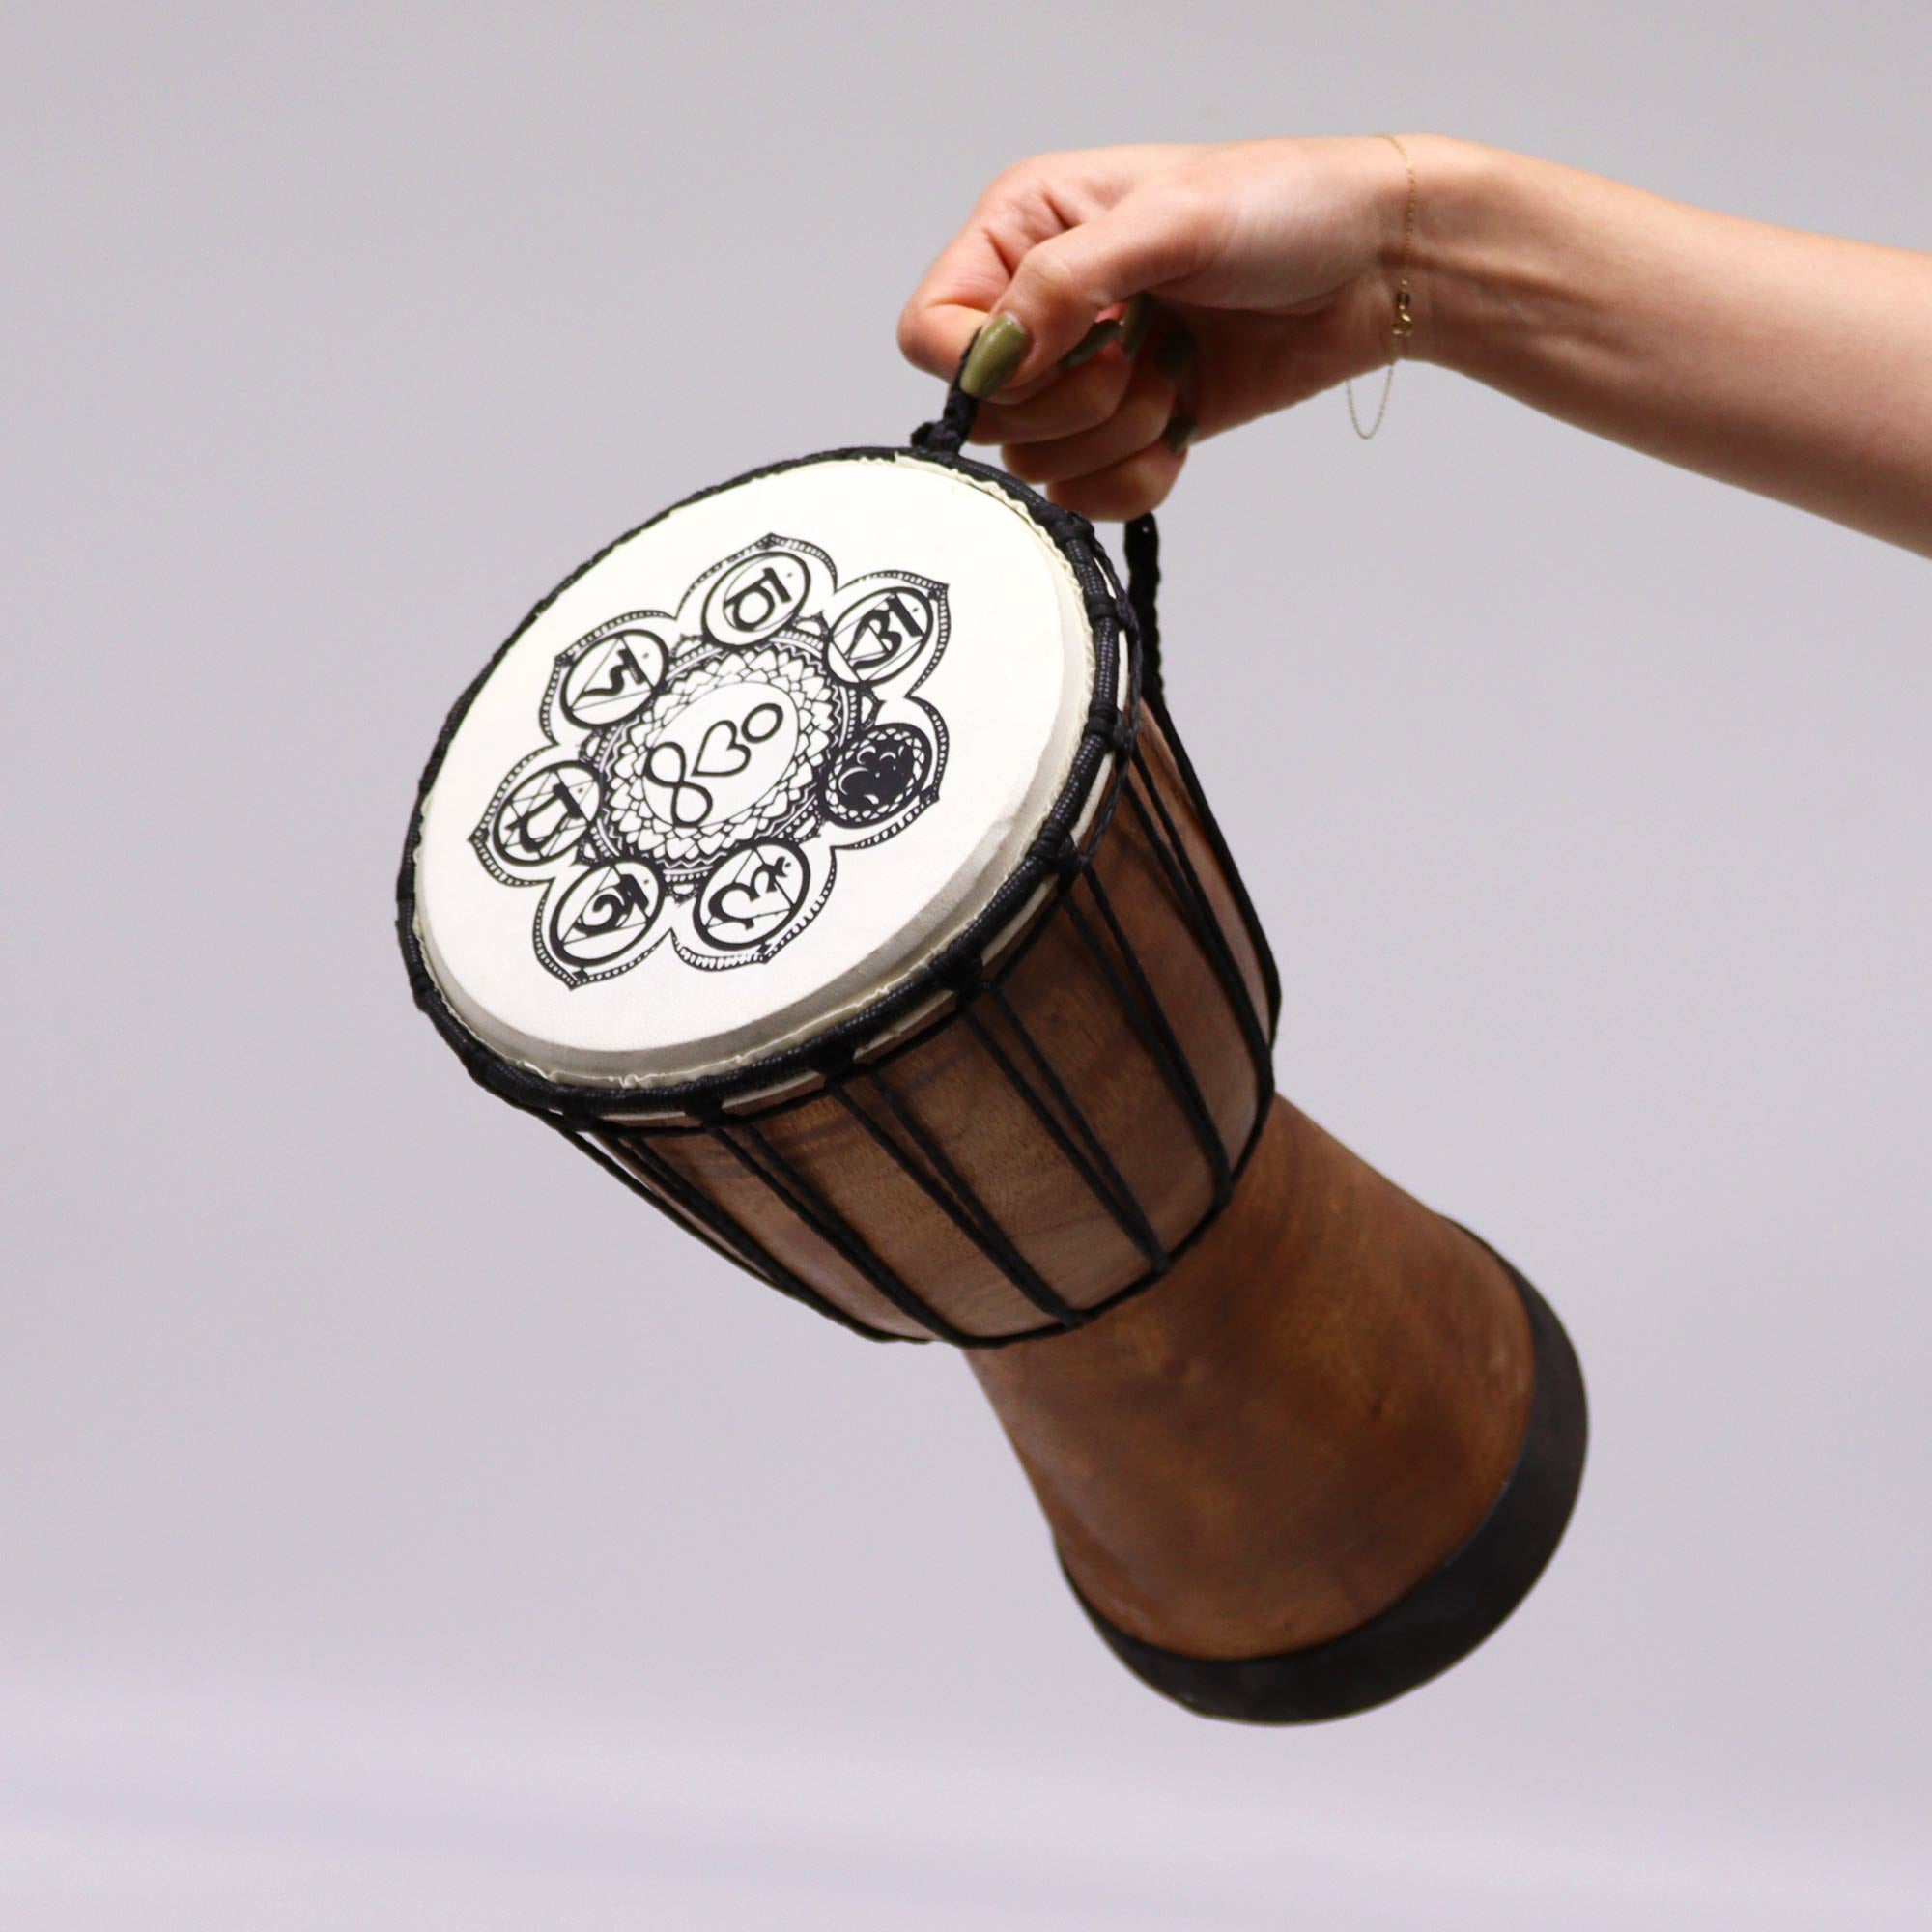 Chakra Wide Top Djembe Drum - 12 inches